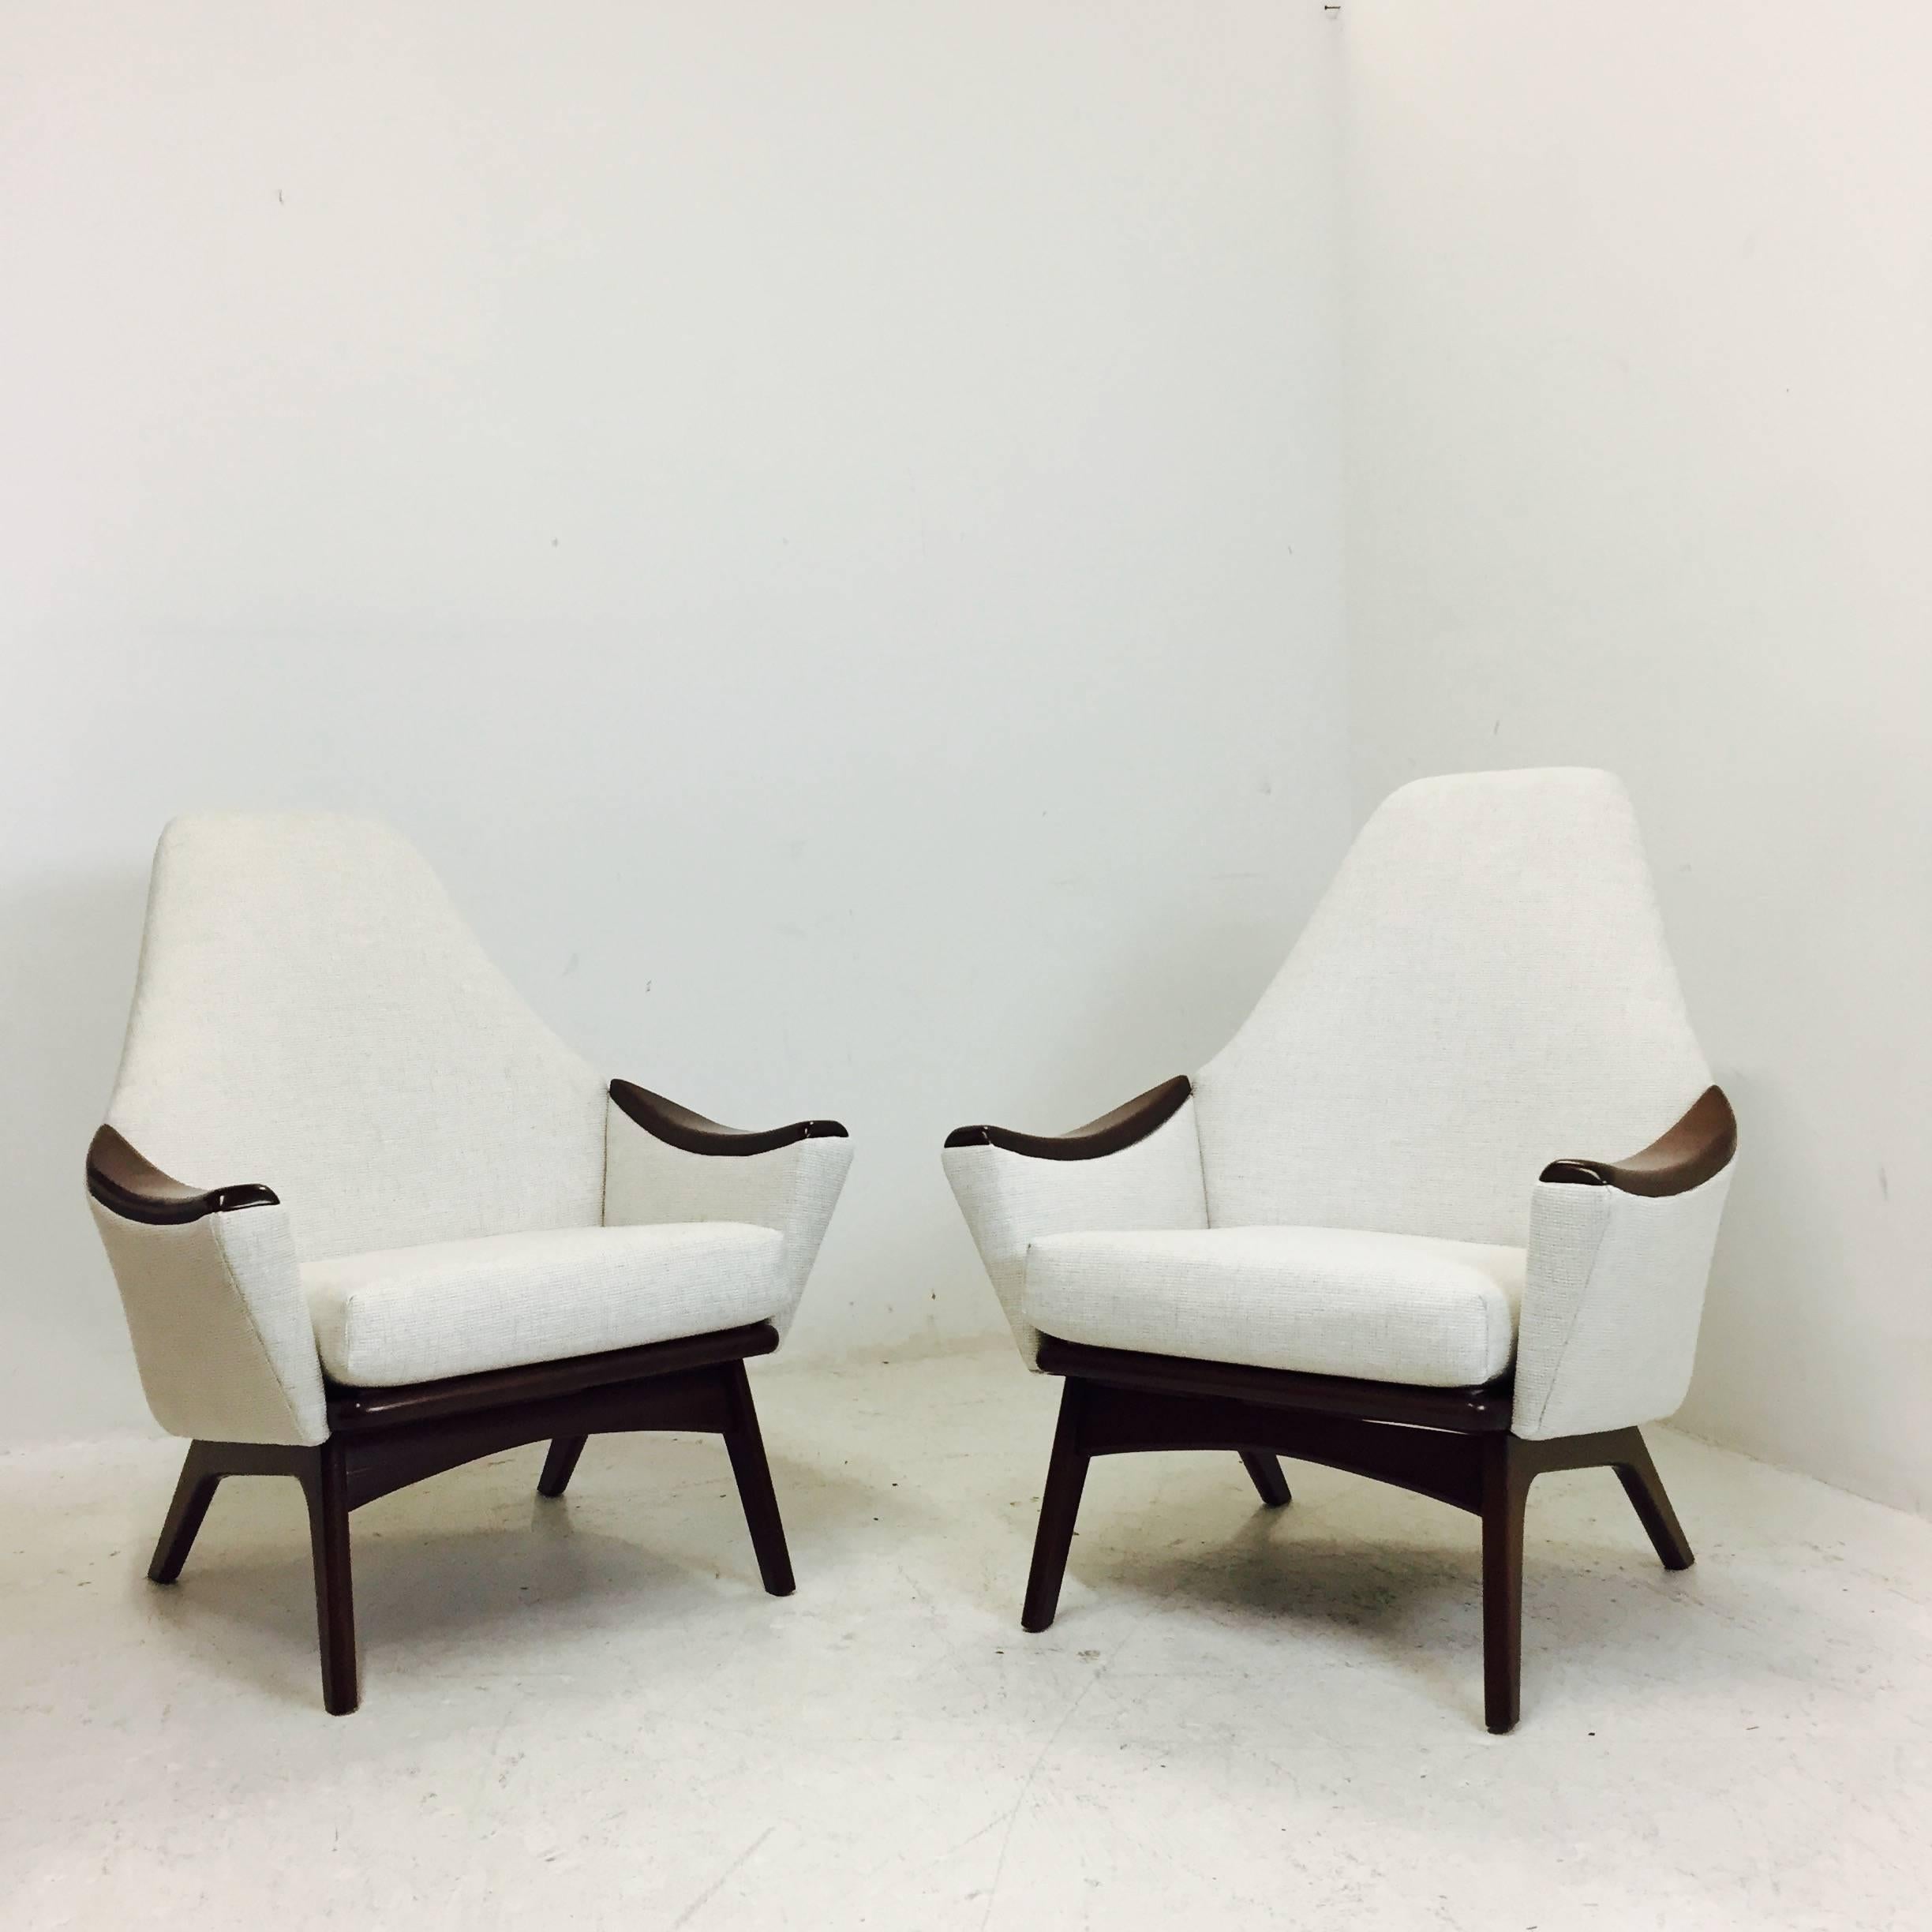 Pair of high back lounge chairs by Adrian Pearsall for Craft Associates. Recently upholstered and with new espresso finish, circa 1960s. 

Dimensions: 30" W x 33" D x 37" T, 
seat height 17" T.